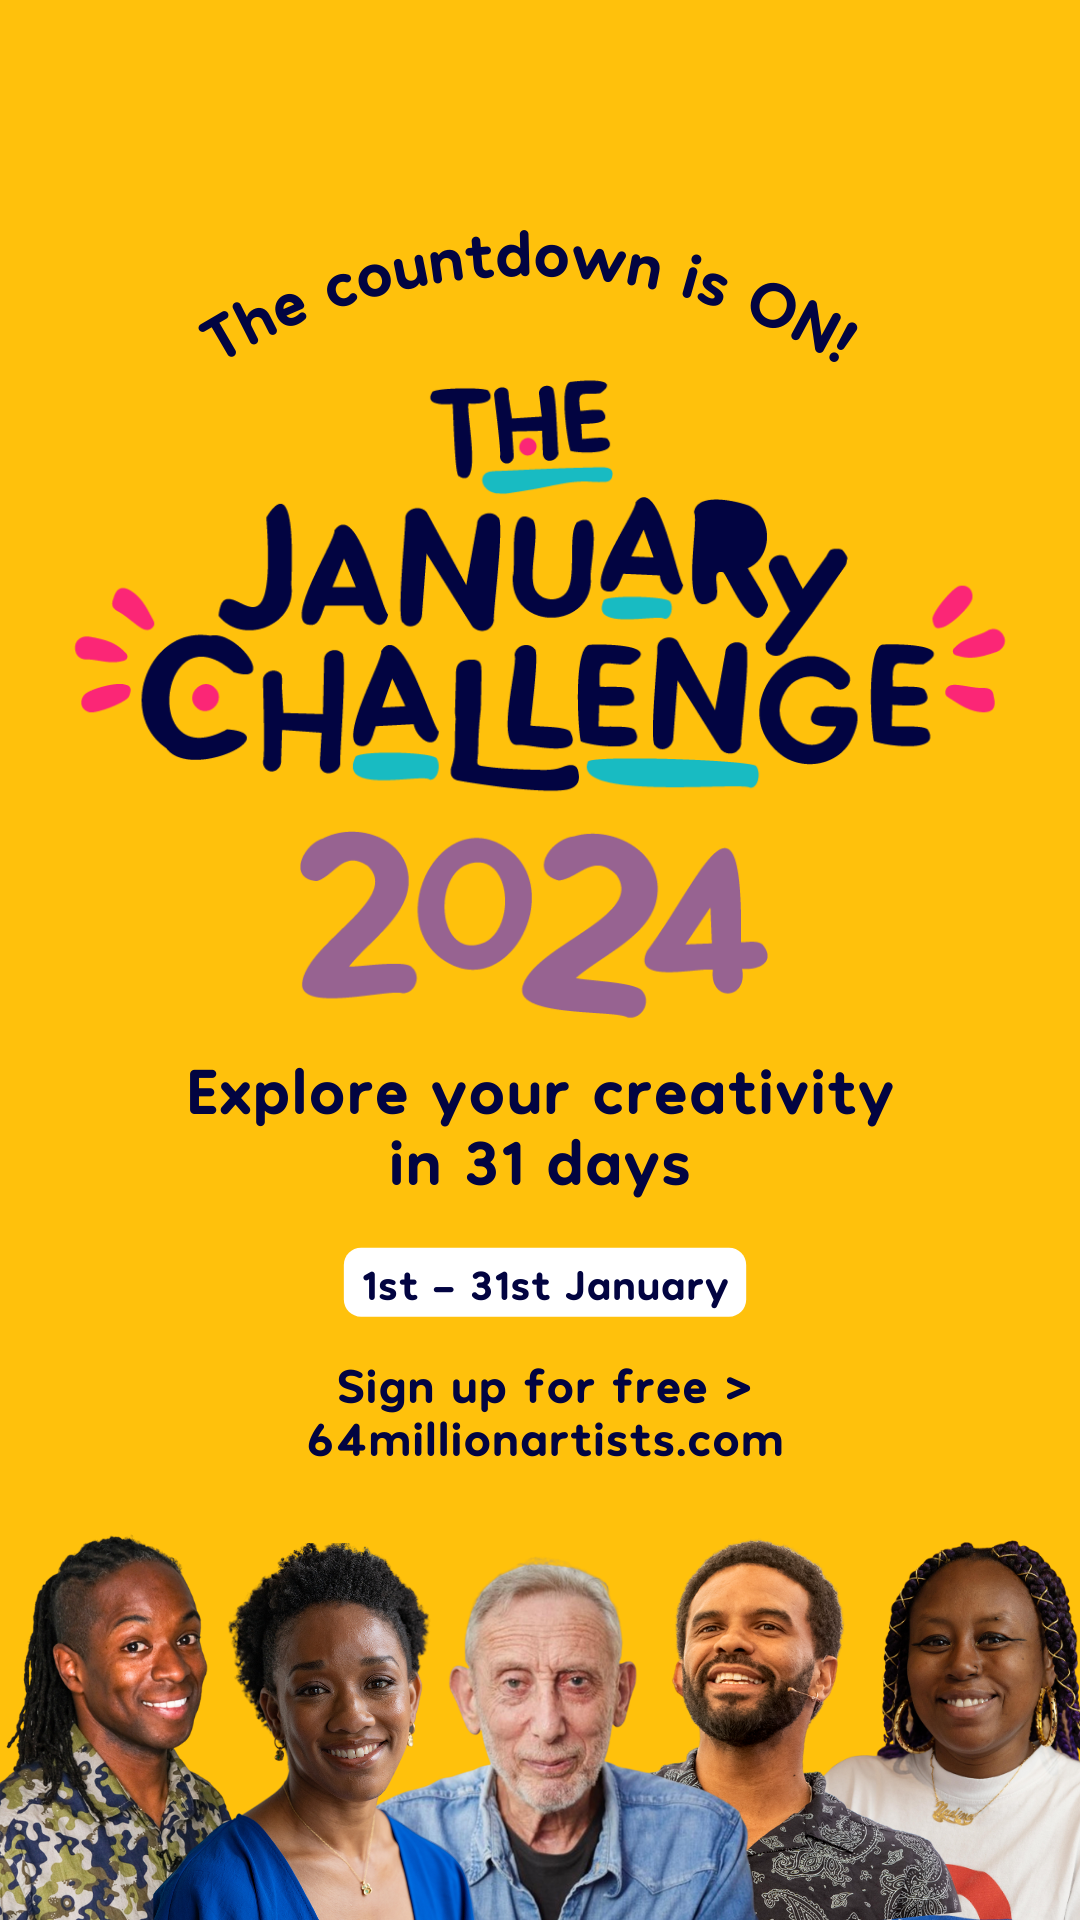 A post that says '31 days to explore your creativity. The January Challenge 2024. Sign up for free today. 64millionartists.com'